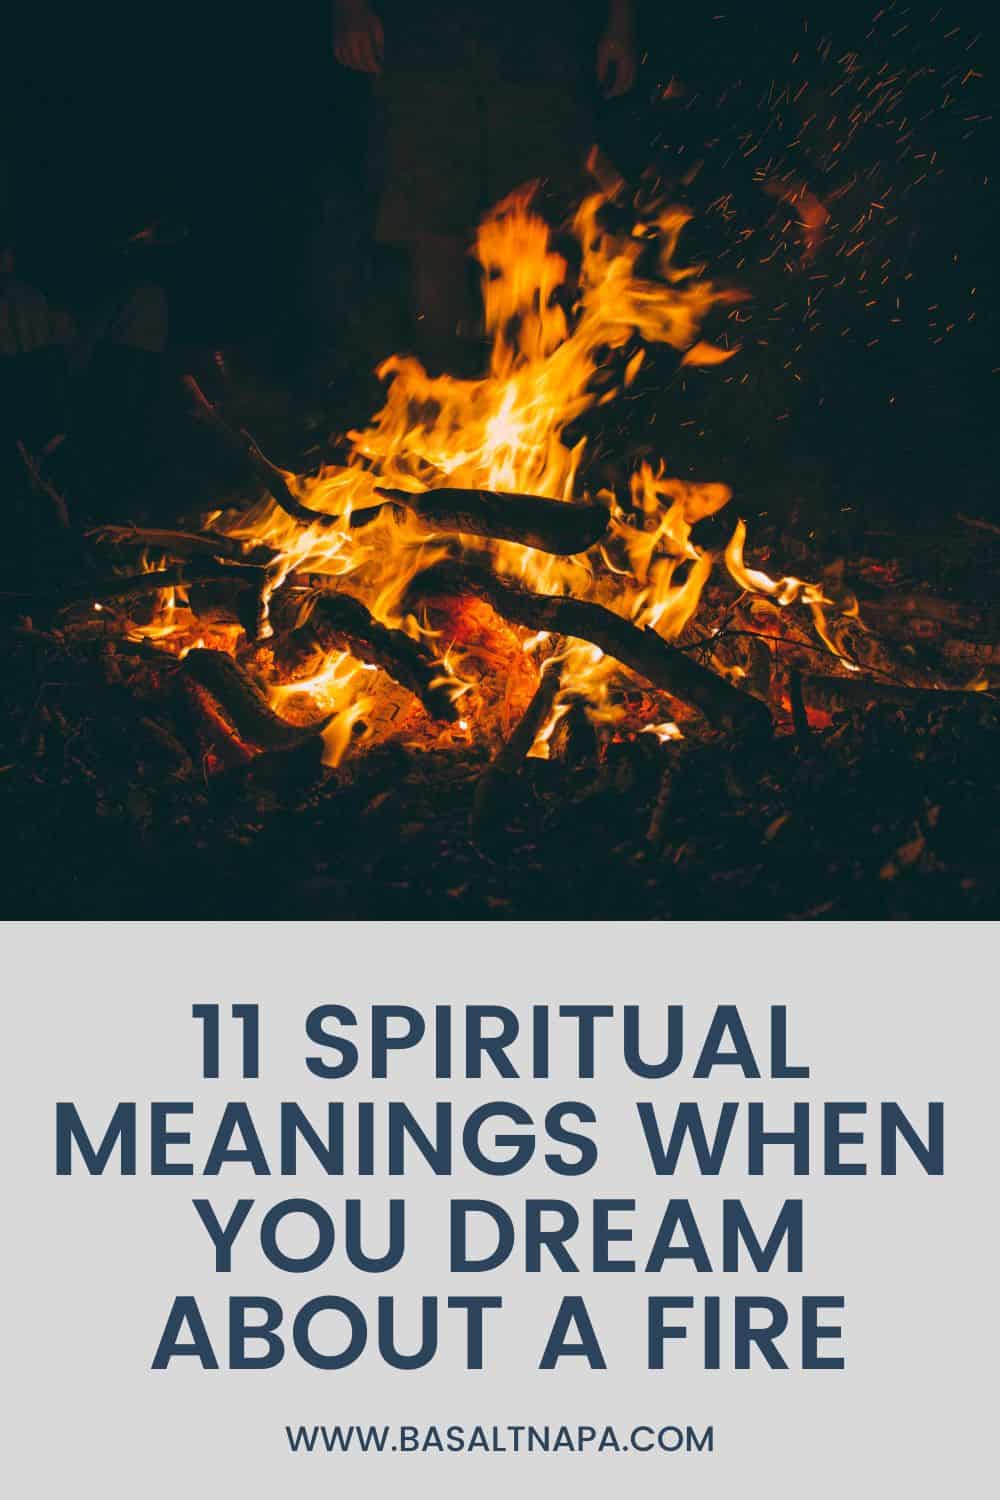 Spiritual Meanings When You Dream About a Fire